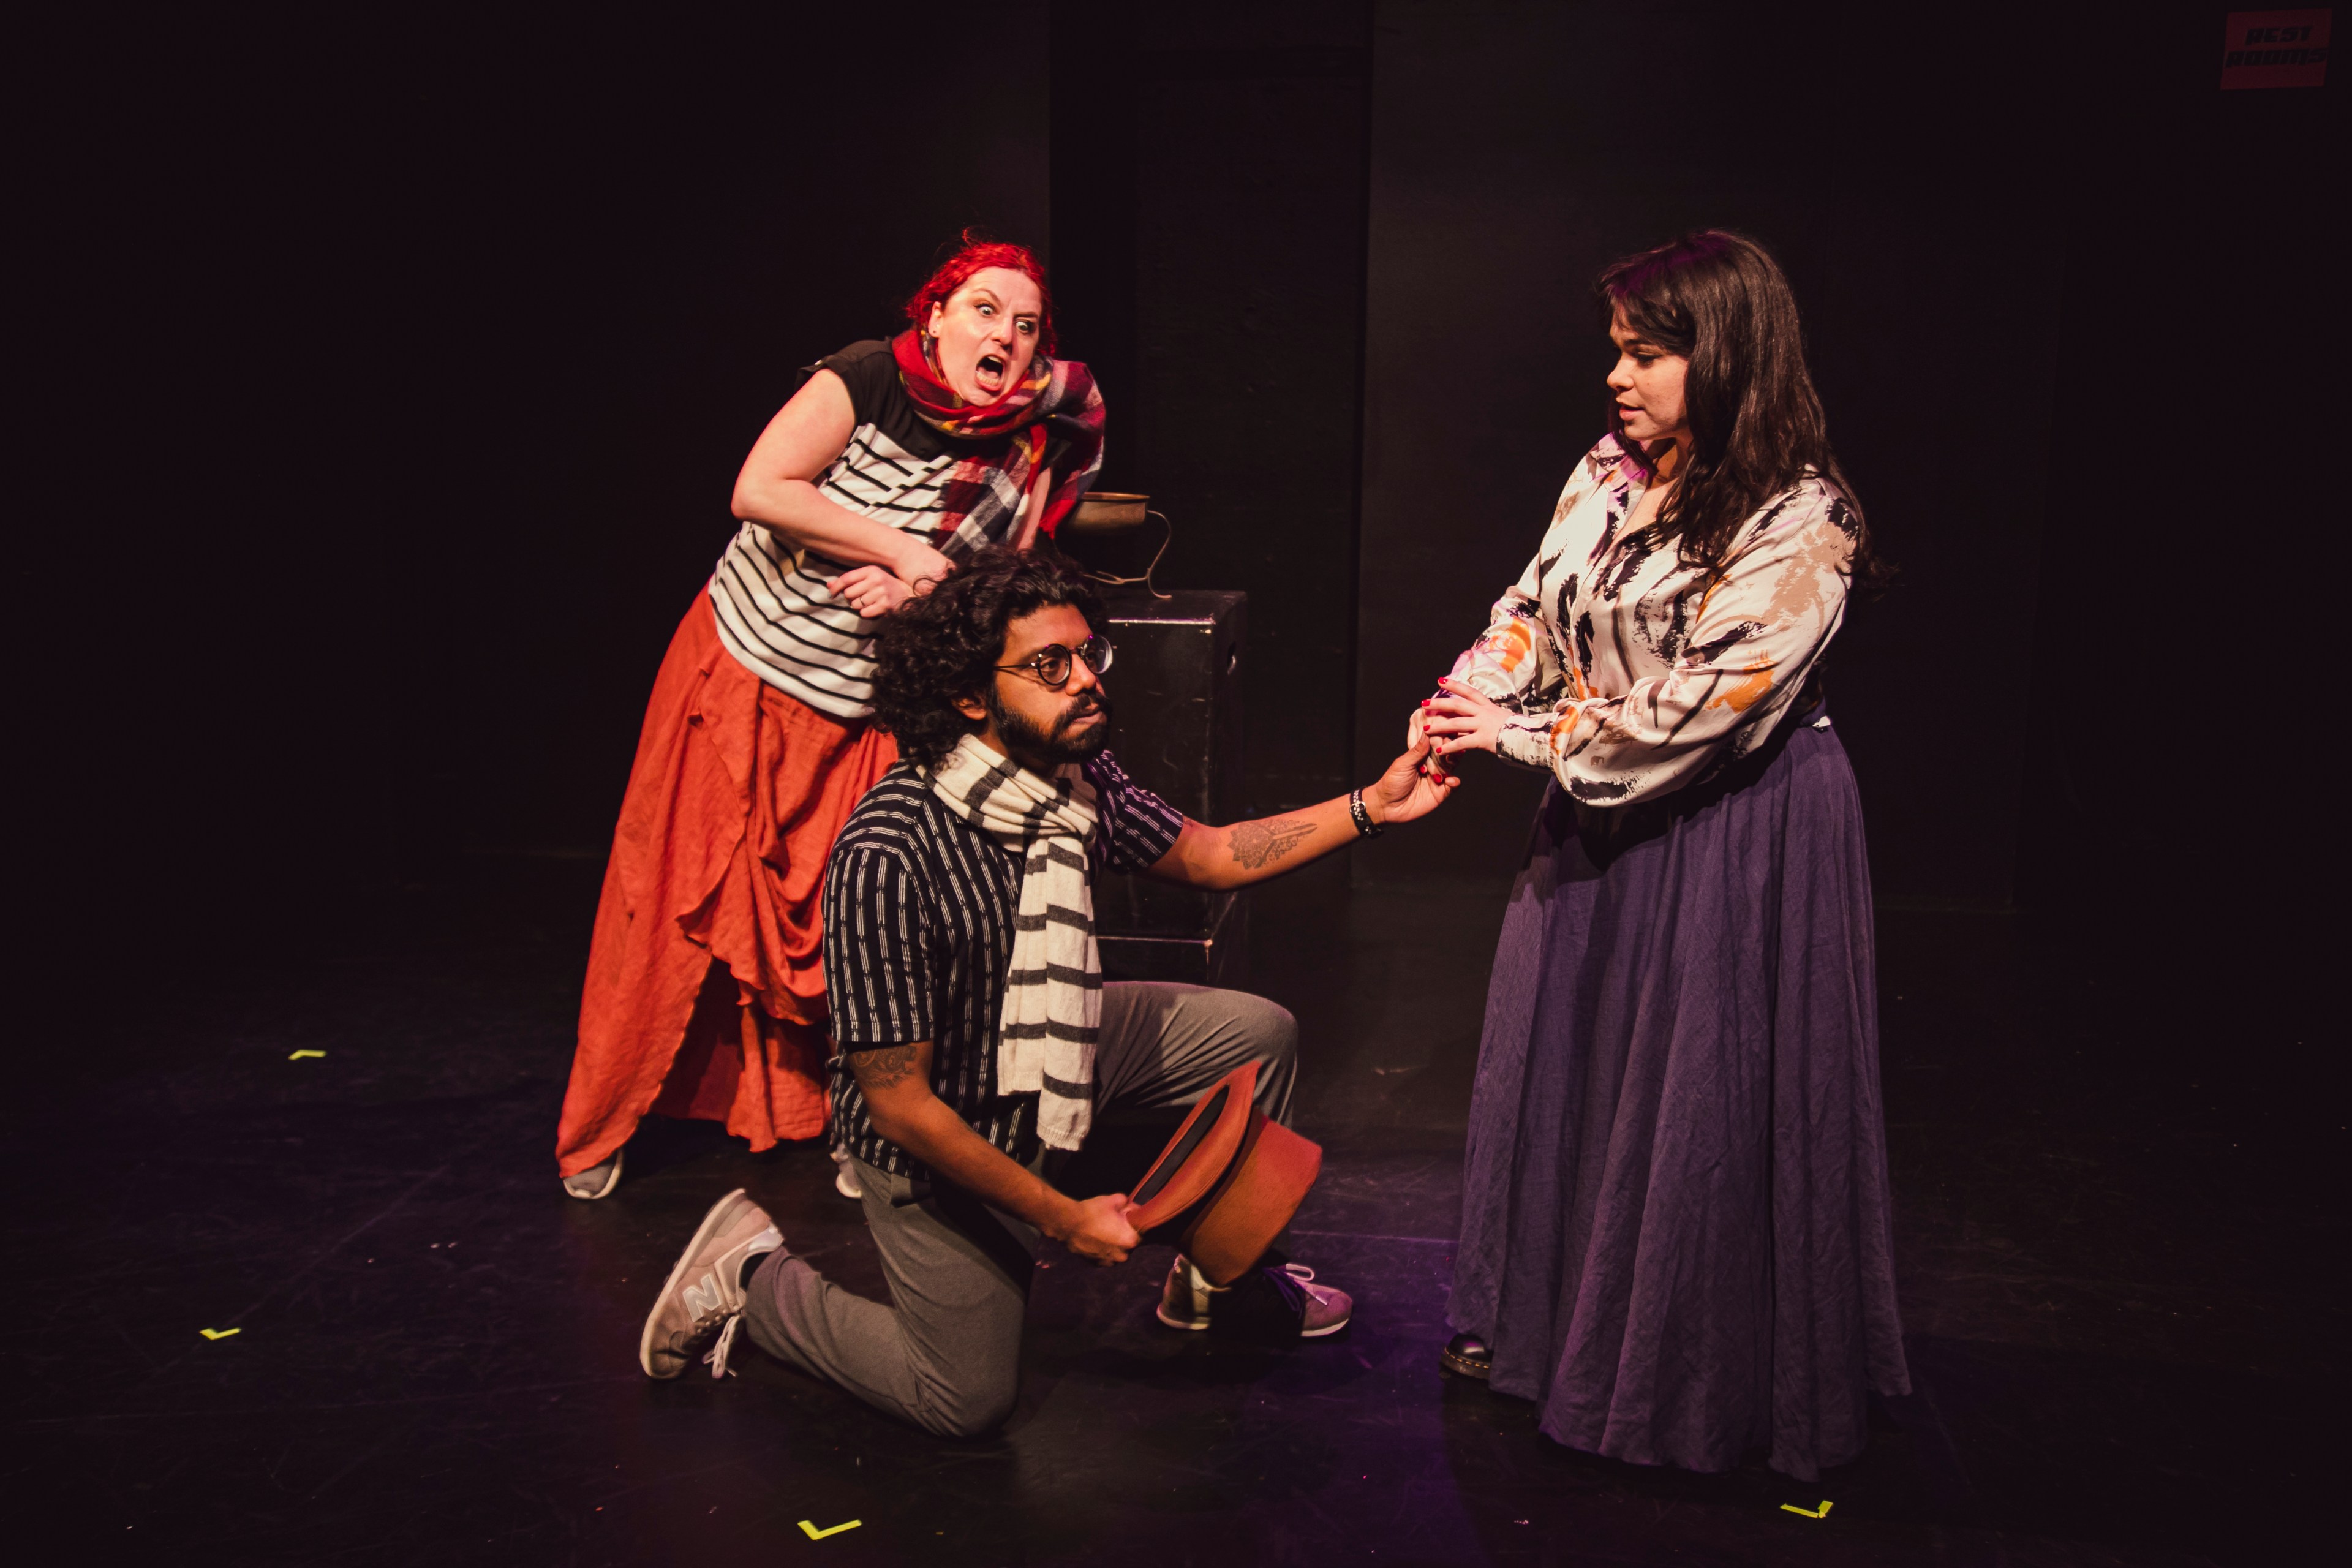 A man kneels down to propose to a woman in a purple skirt while another woman looks in comedy sketch by the San Francisco performance troupe Killing My Lobster.